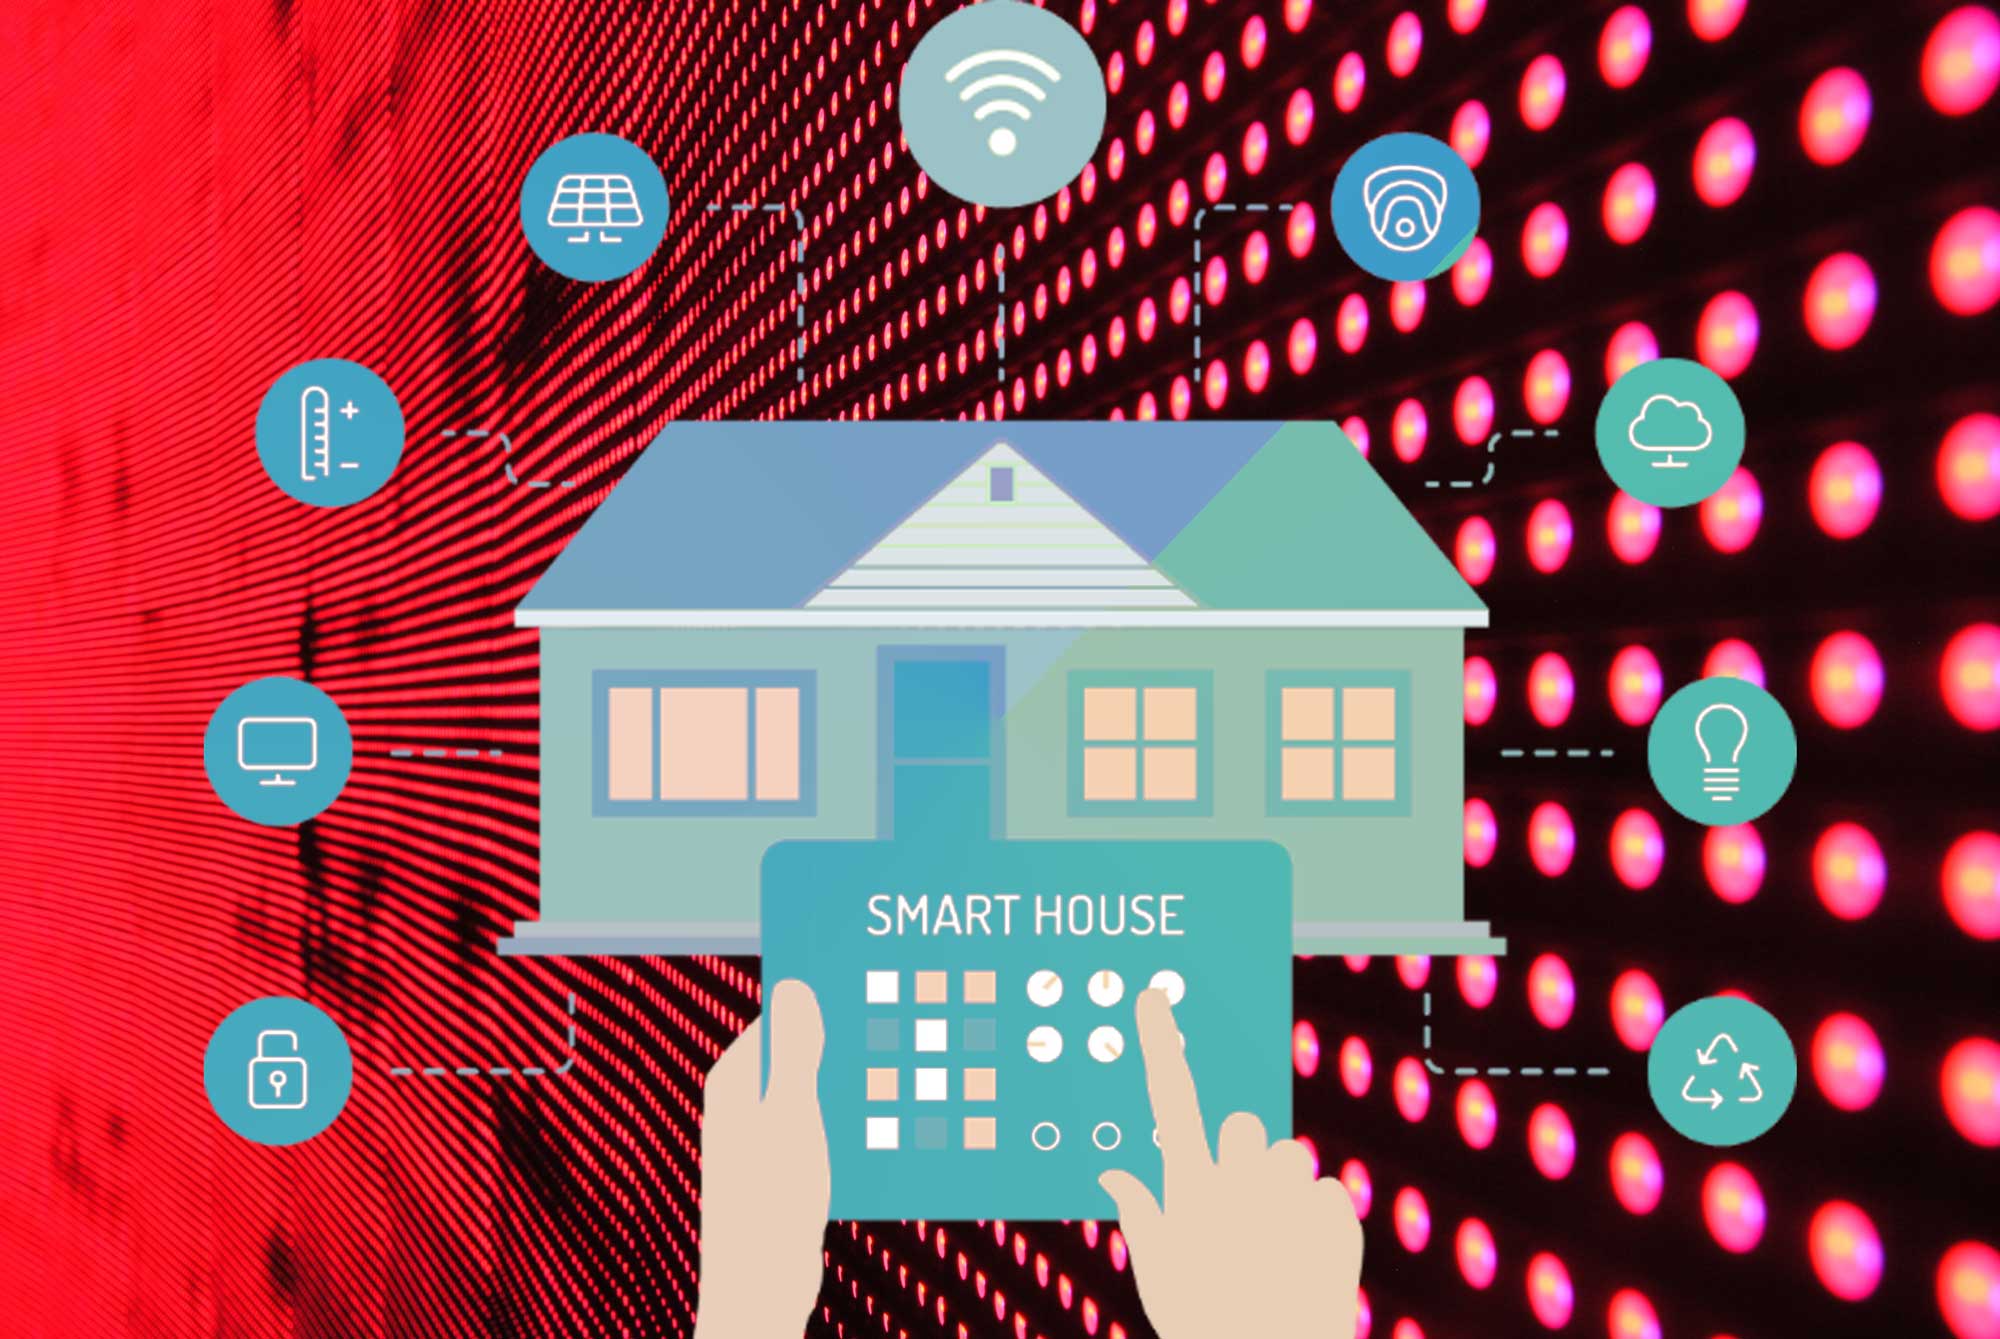 Triple A SMART HOME, INTERNT OF THIKNS, Artificial intelligence